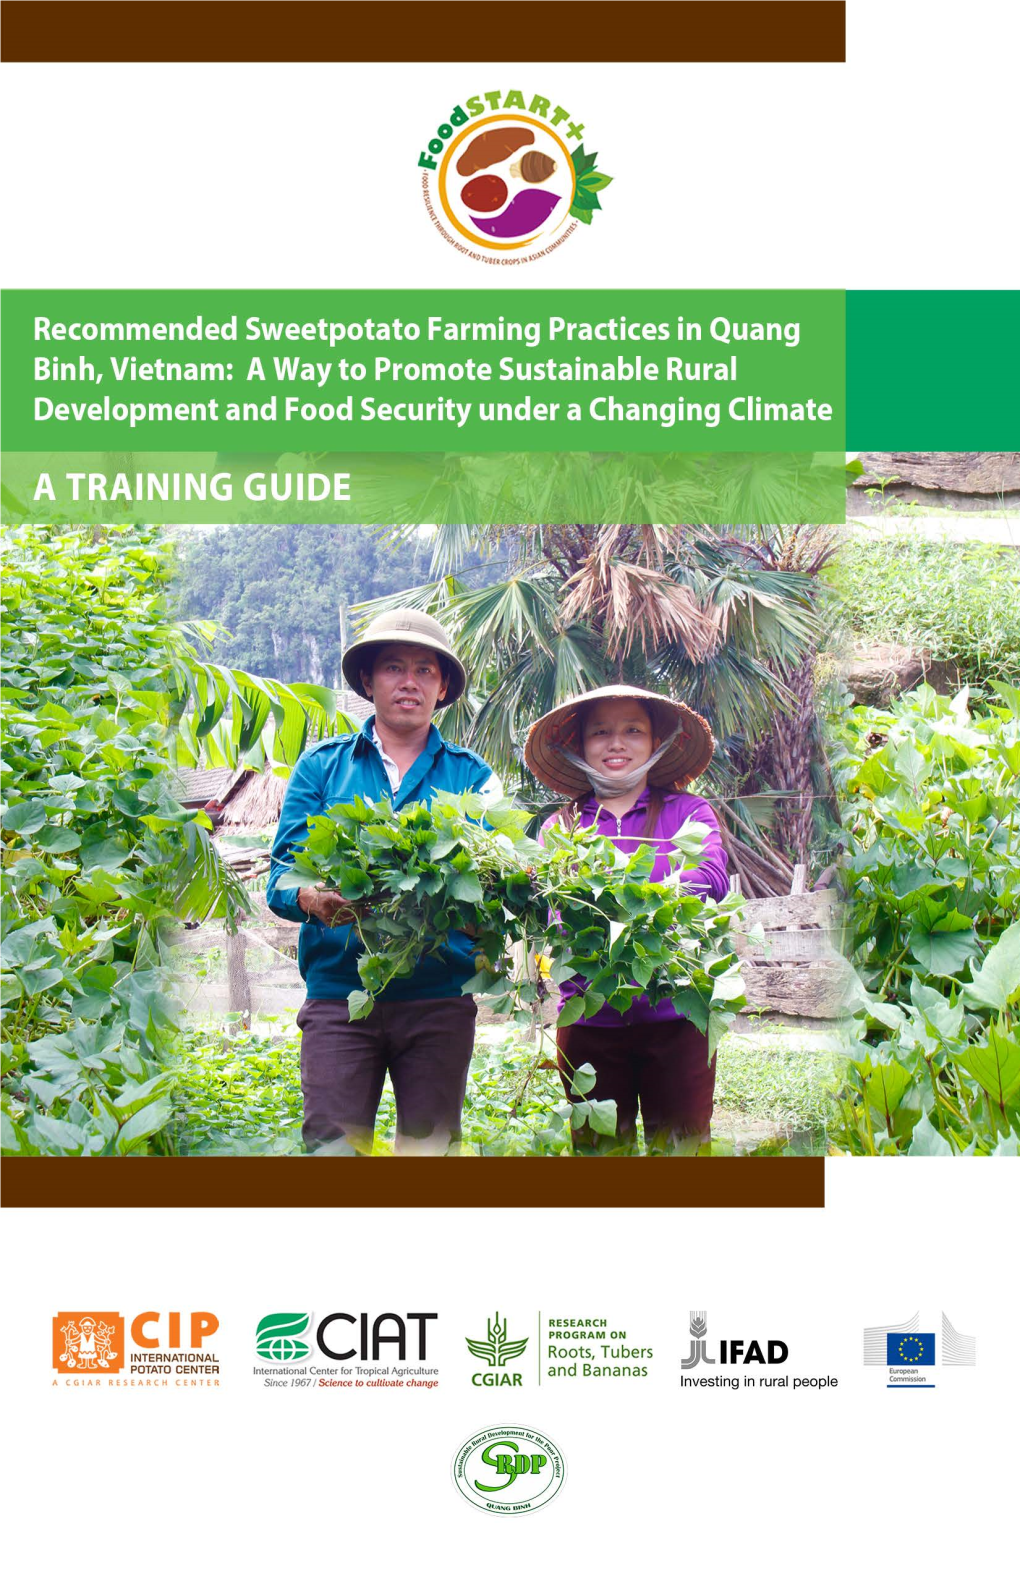 Recommended Sweetpotato Farming Practices in Quang Binh, Vietnam: a Way to Promote Sustainable Rural Development and Food Security Under a Changing Climate